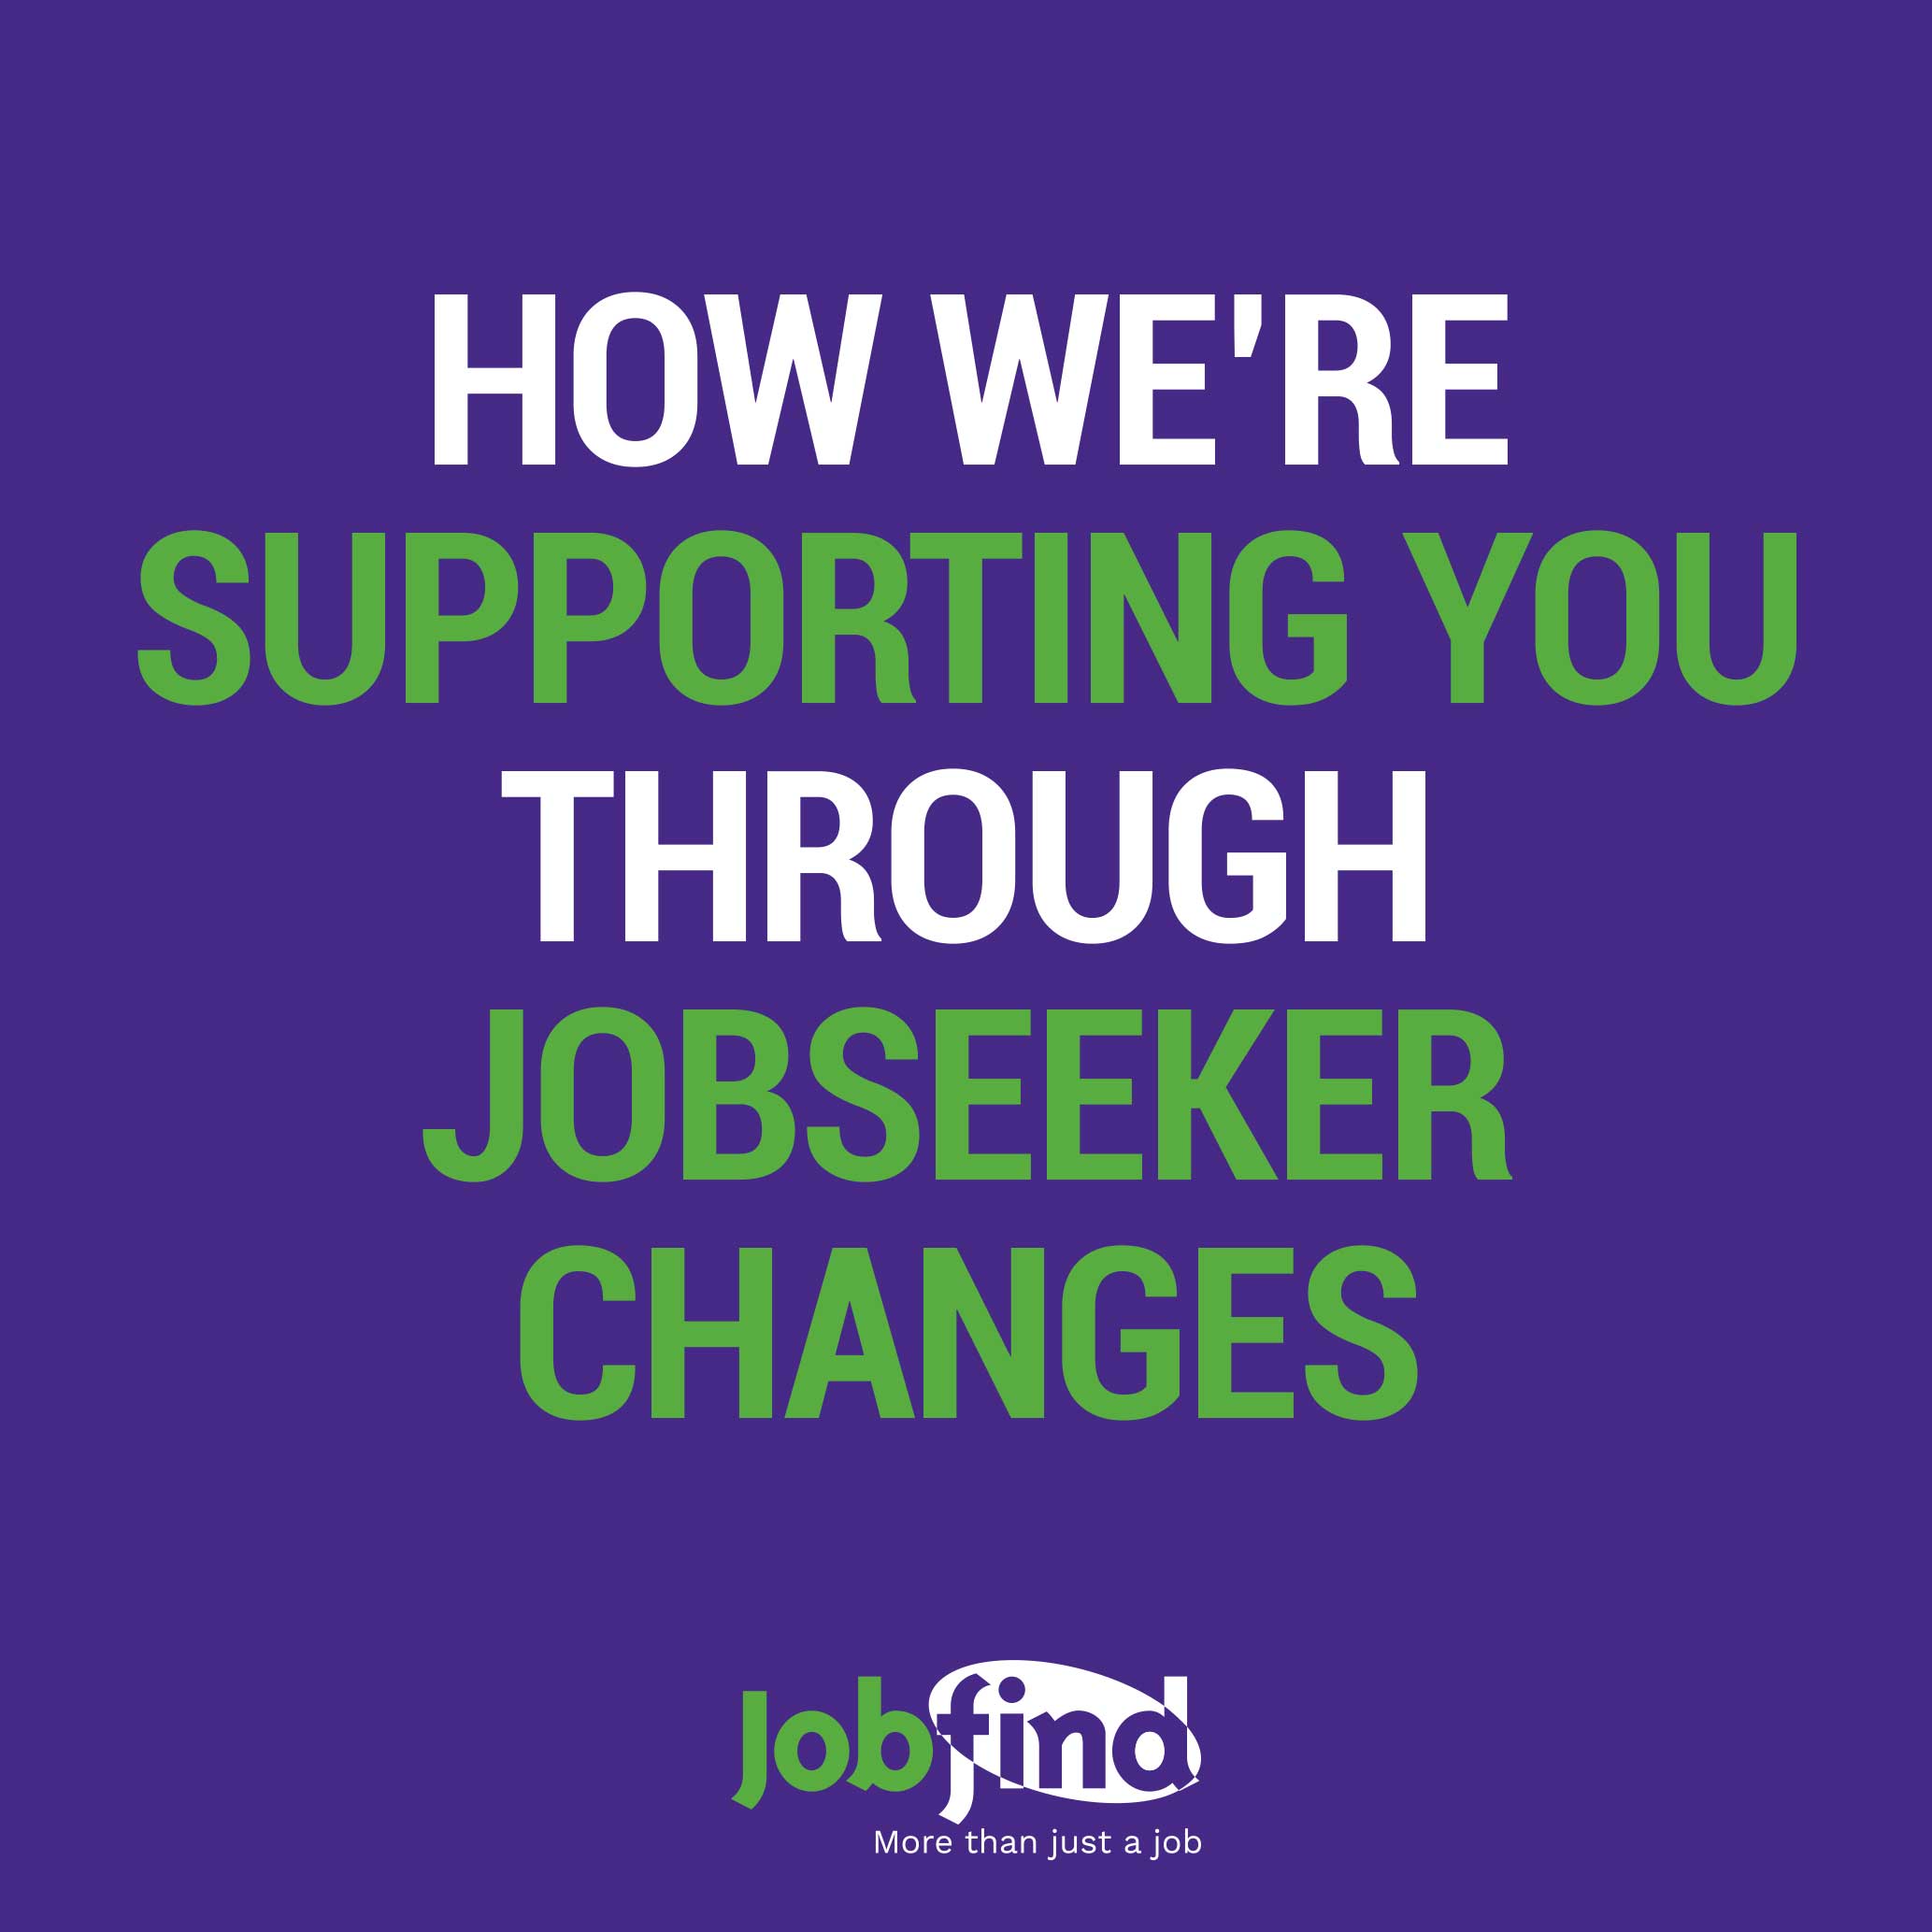 Changes to mutual obligations for job seekers - image of purple and green poster reading How We're Supporting You Through JobSeeker Changes